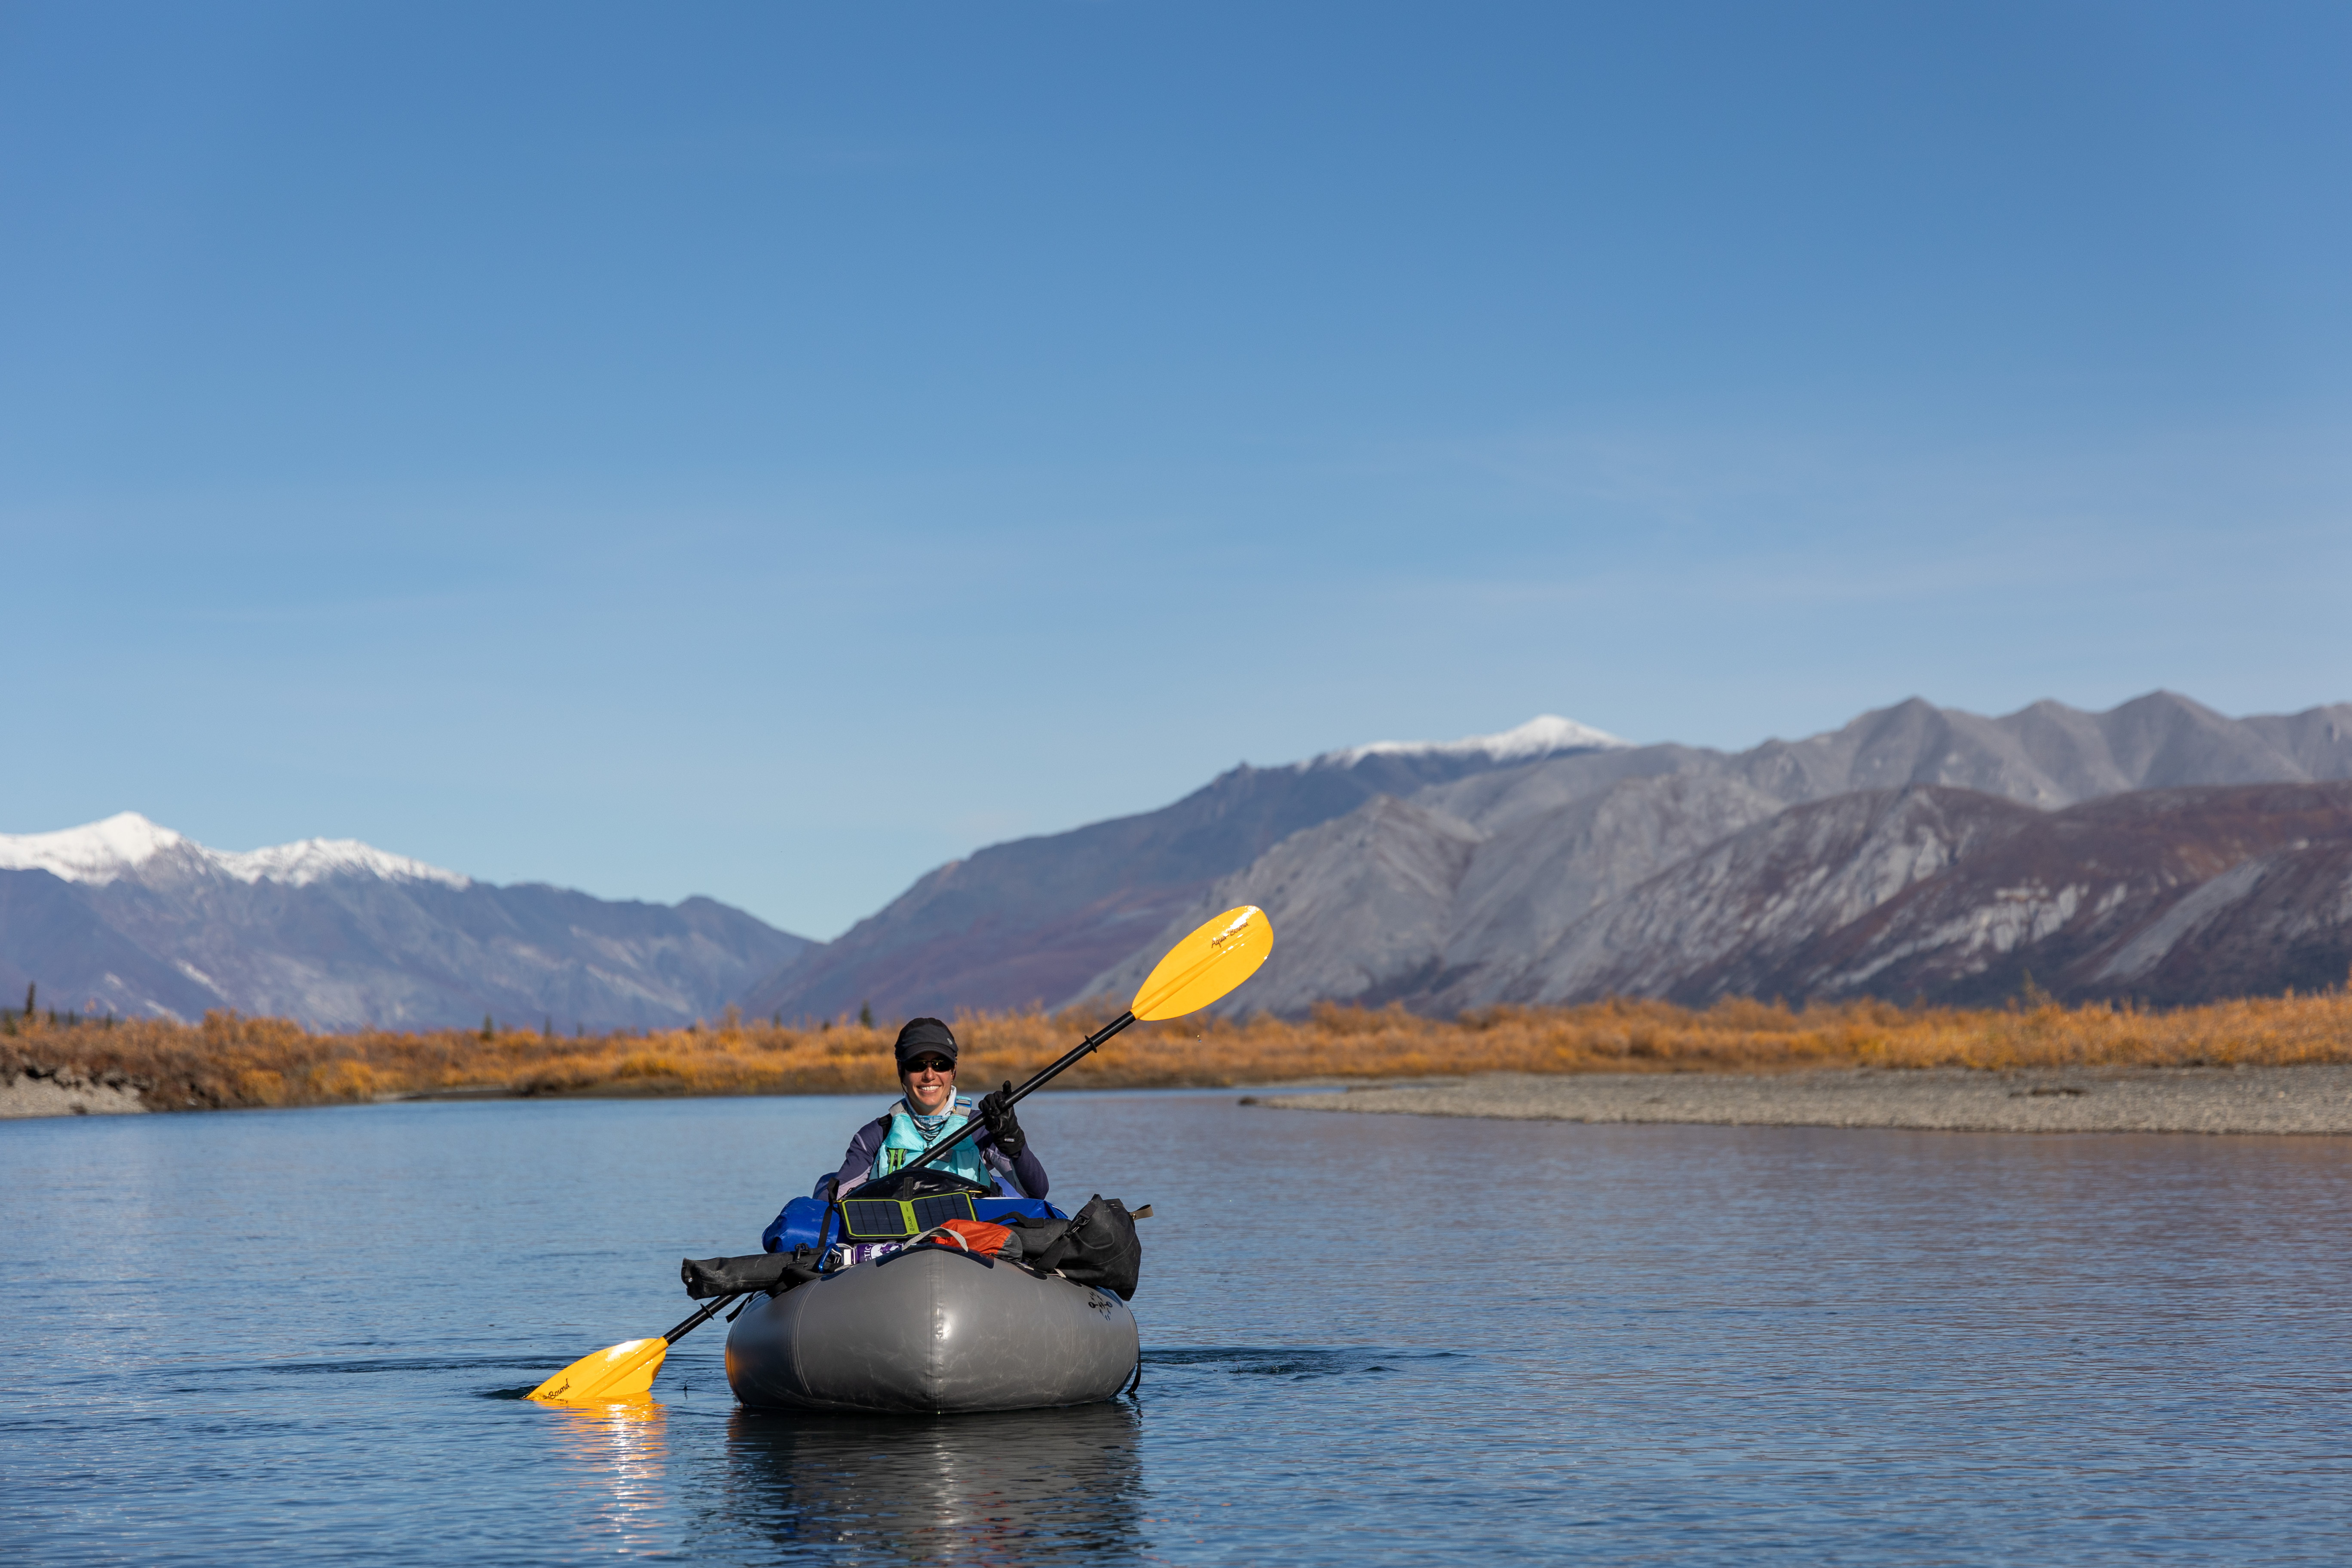 Woman in a small inflatable raft on a river with mountains in background